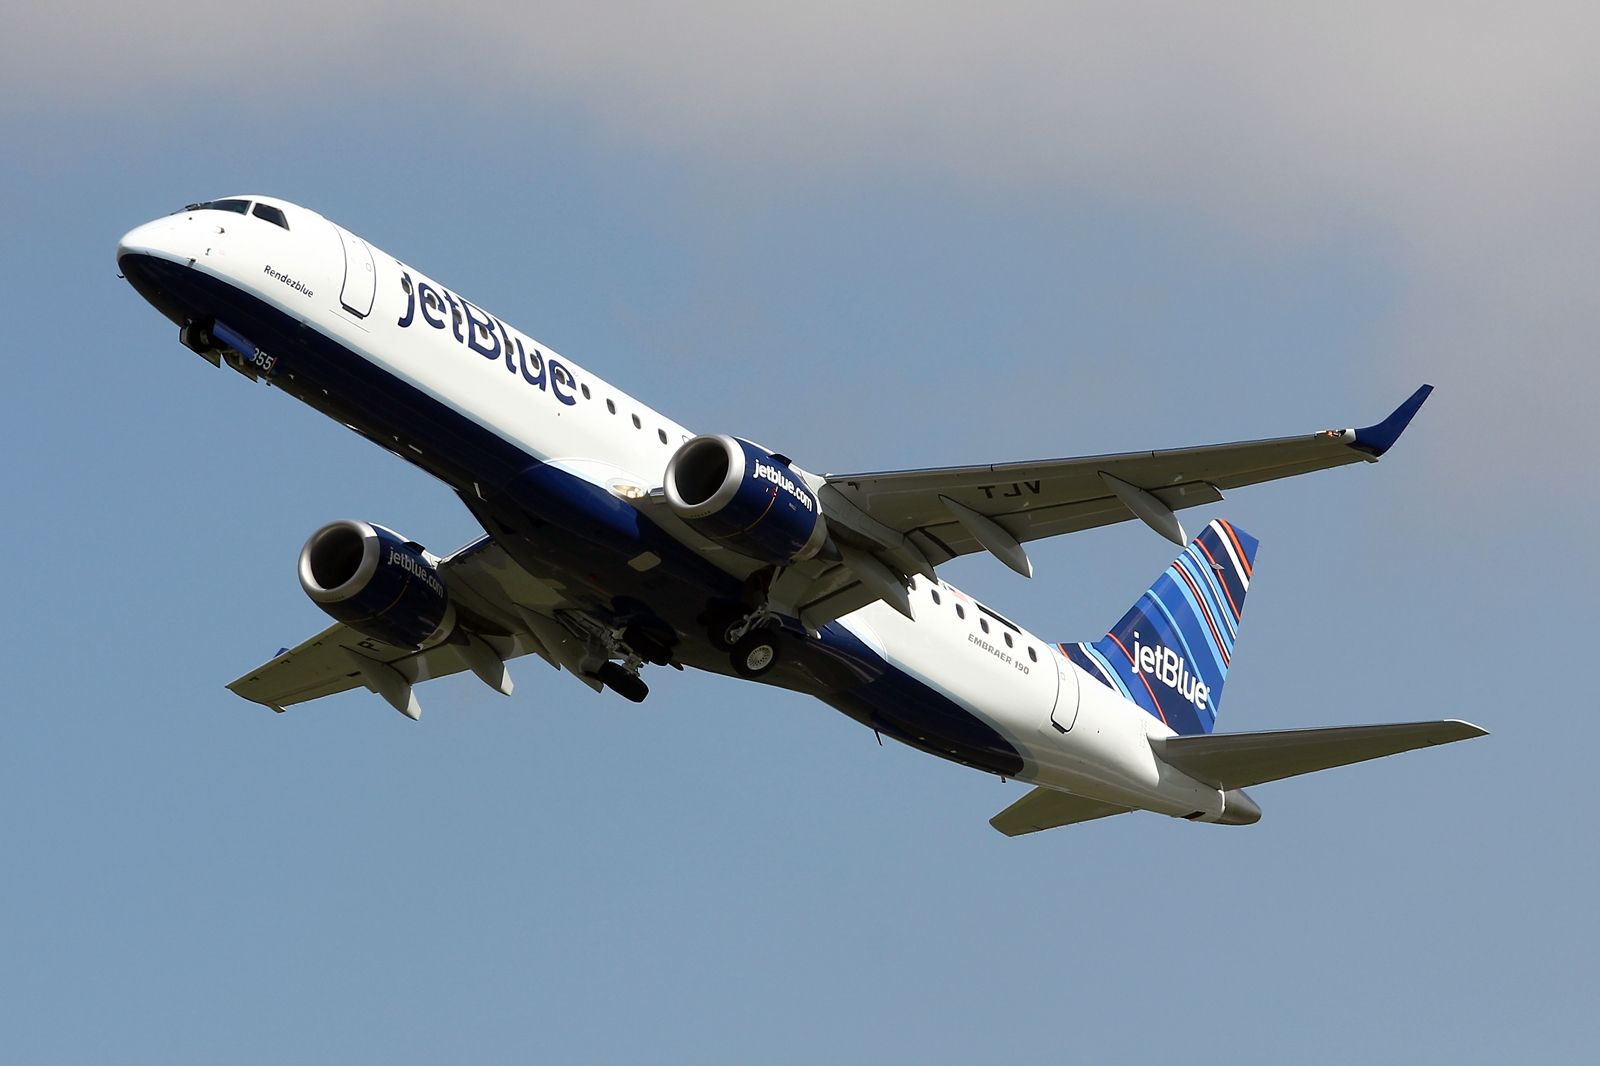 JetBlue Airways With Embraer 190 Rendezblue After Takeoff